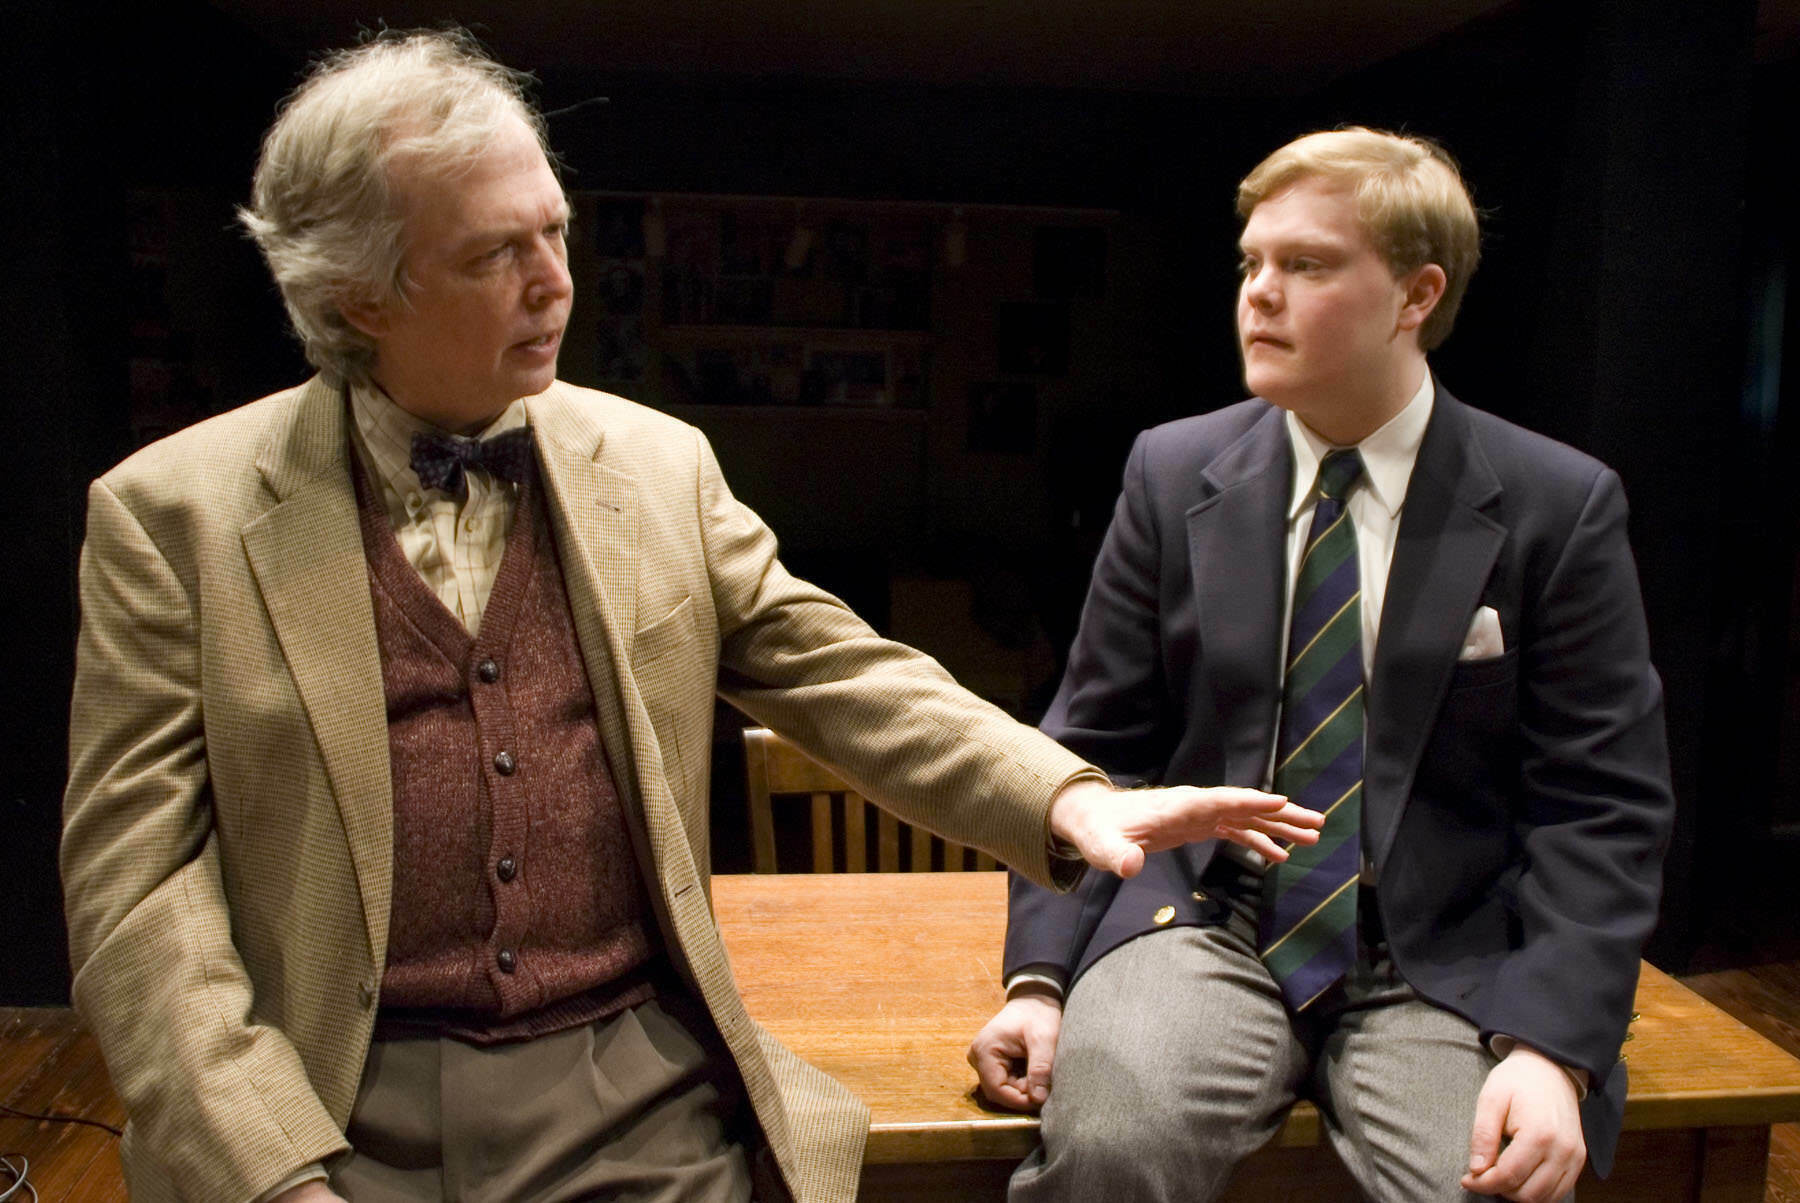 The History Boys at the Churchill | Theatre review - The 